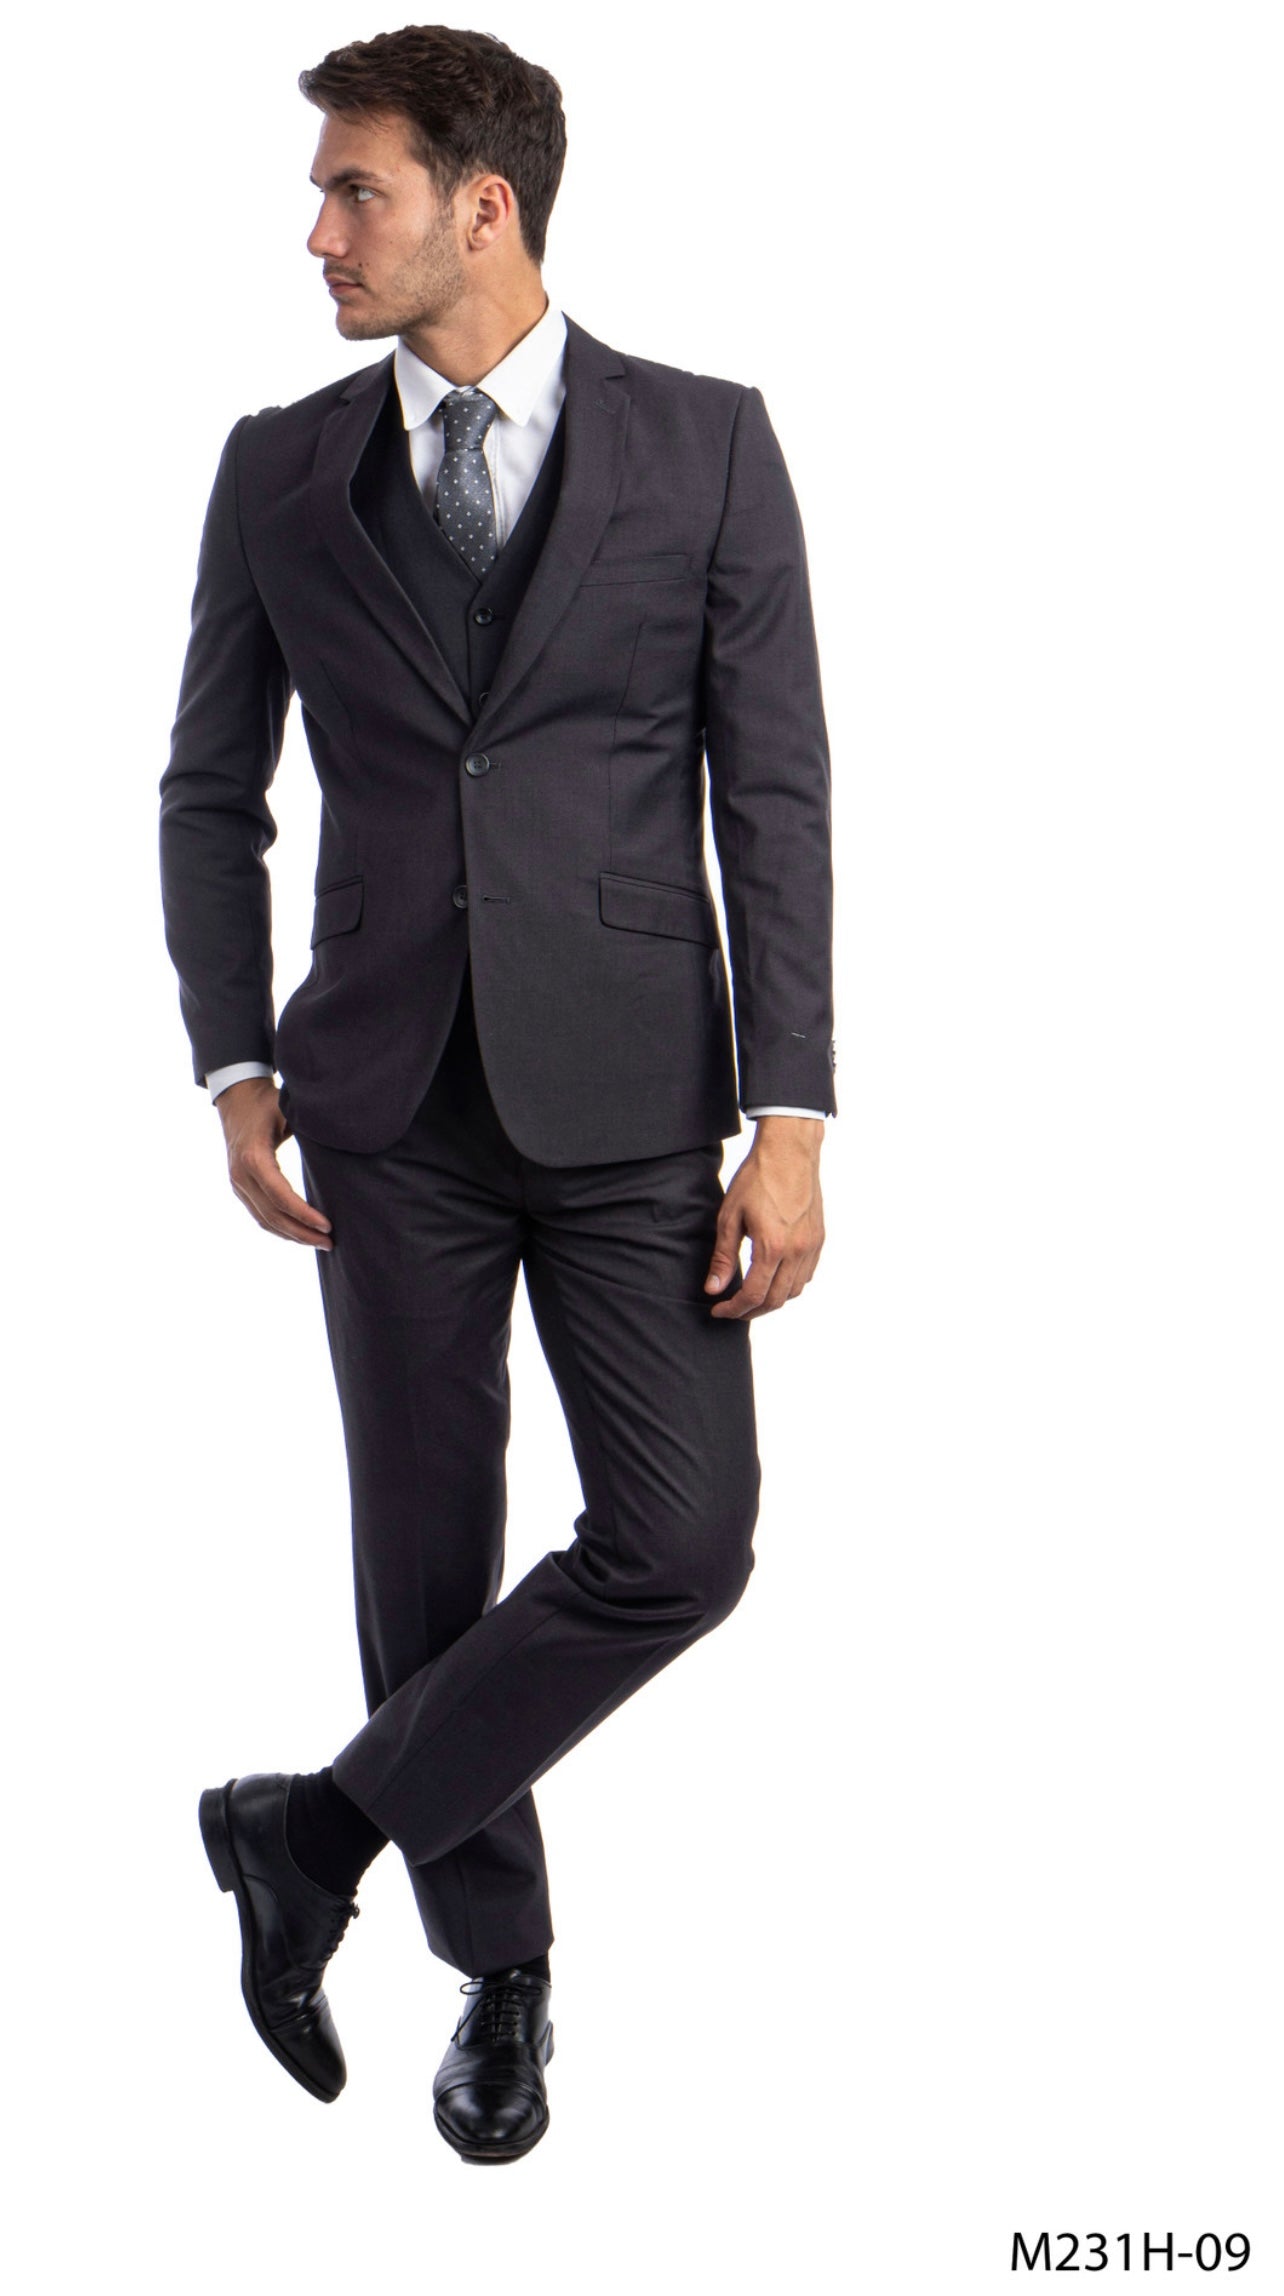 Azzuro Charcoal Suit